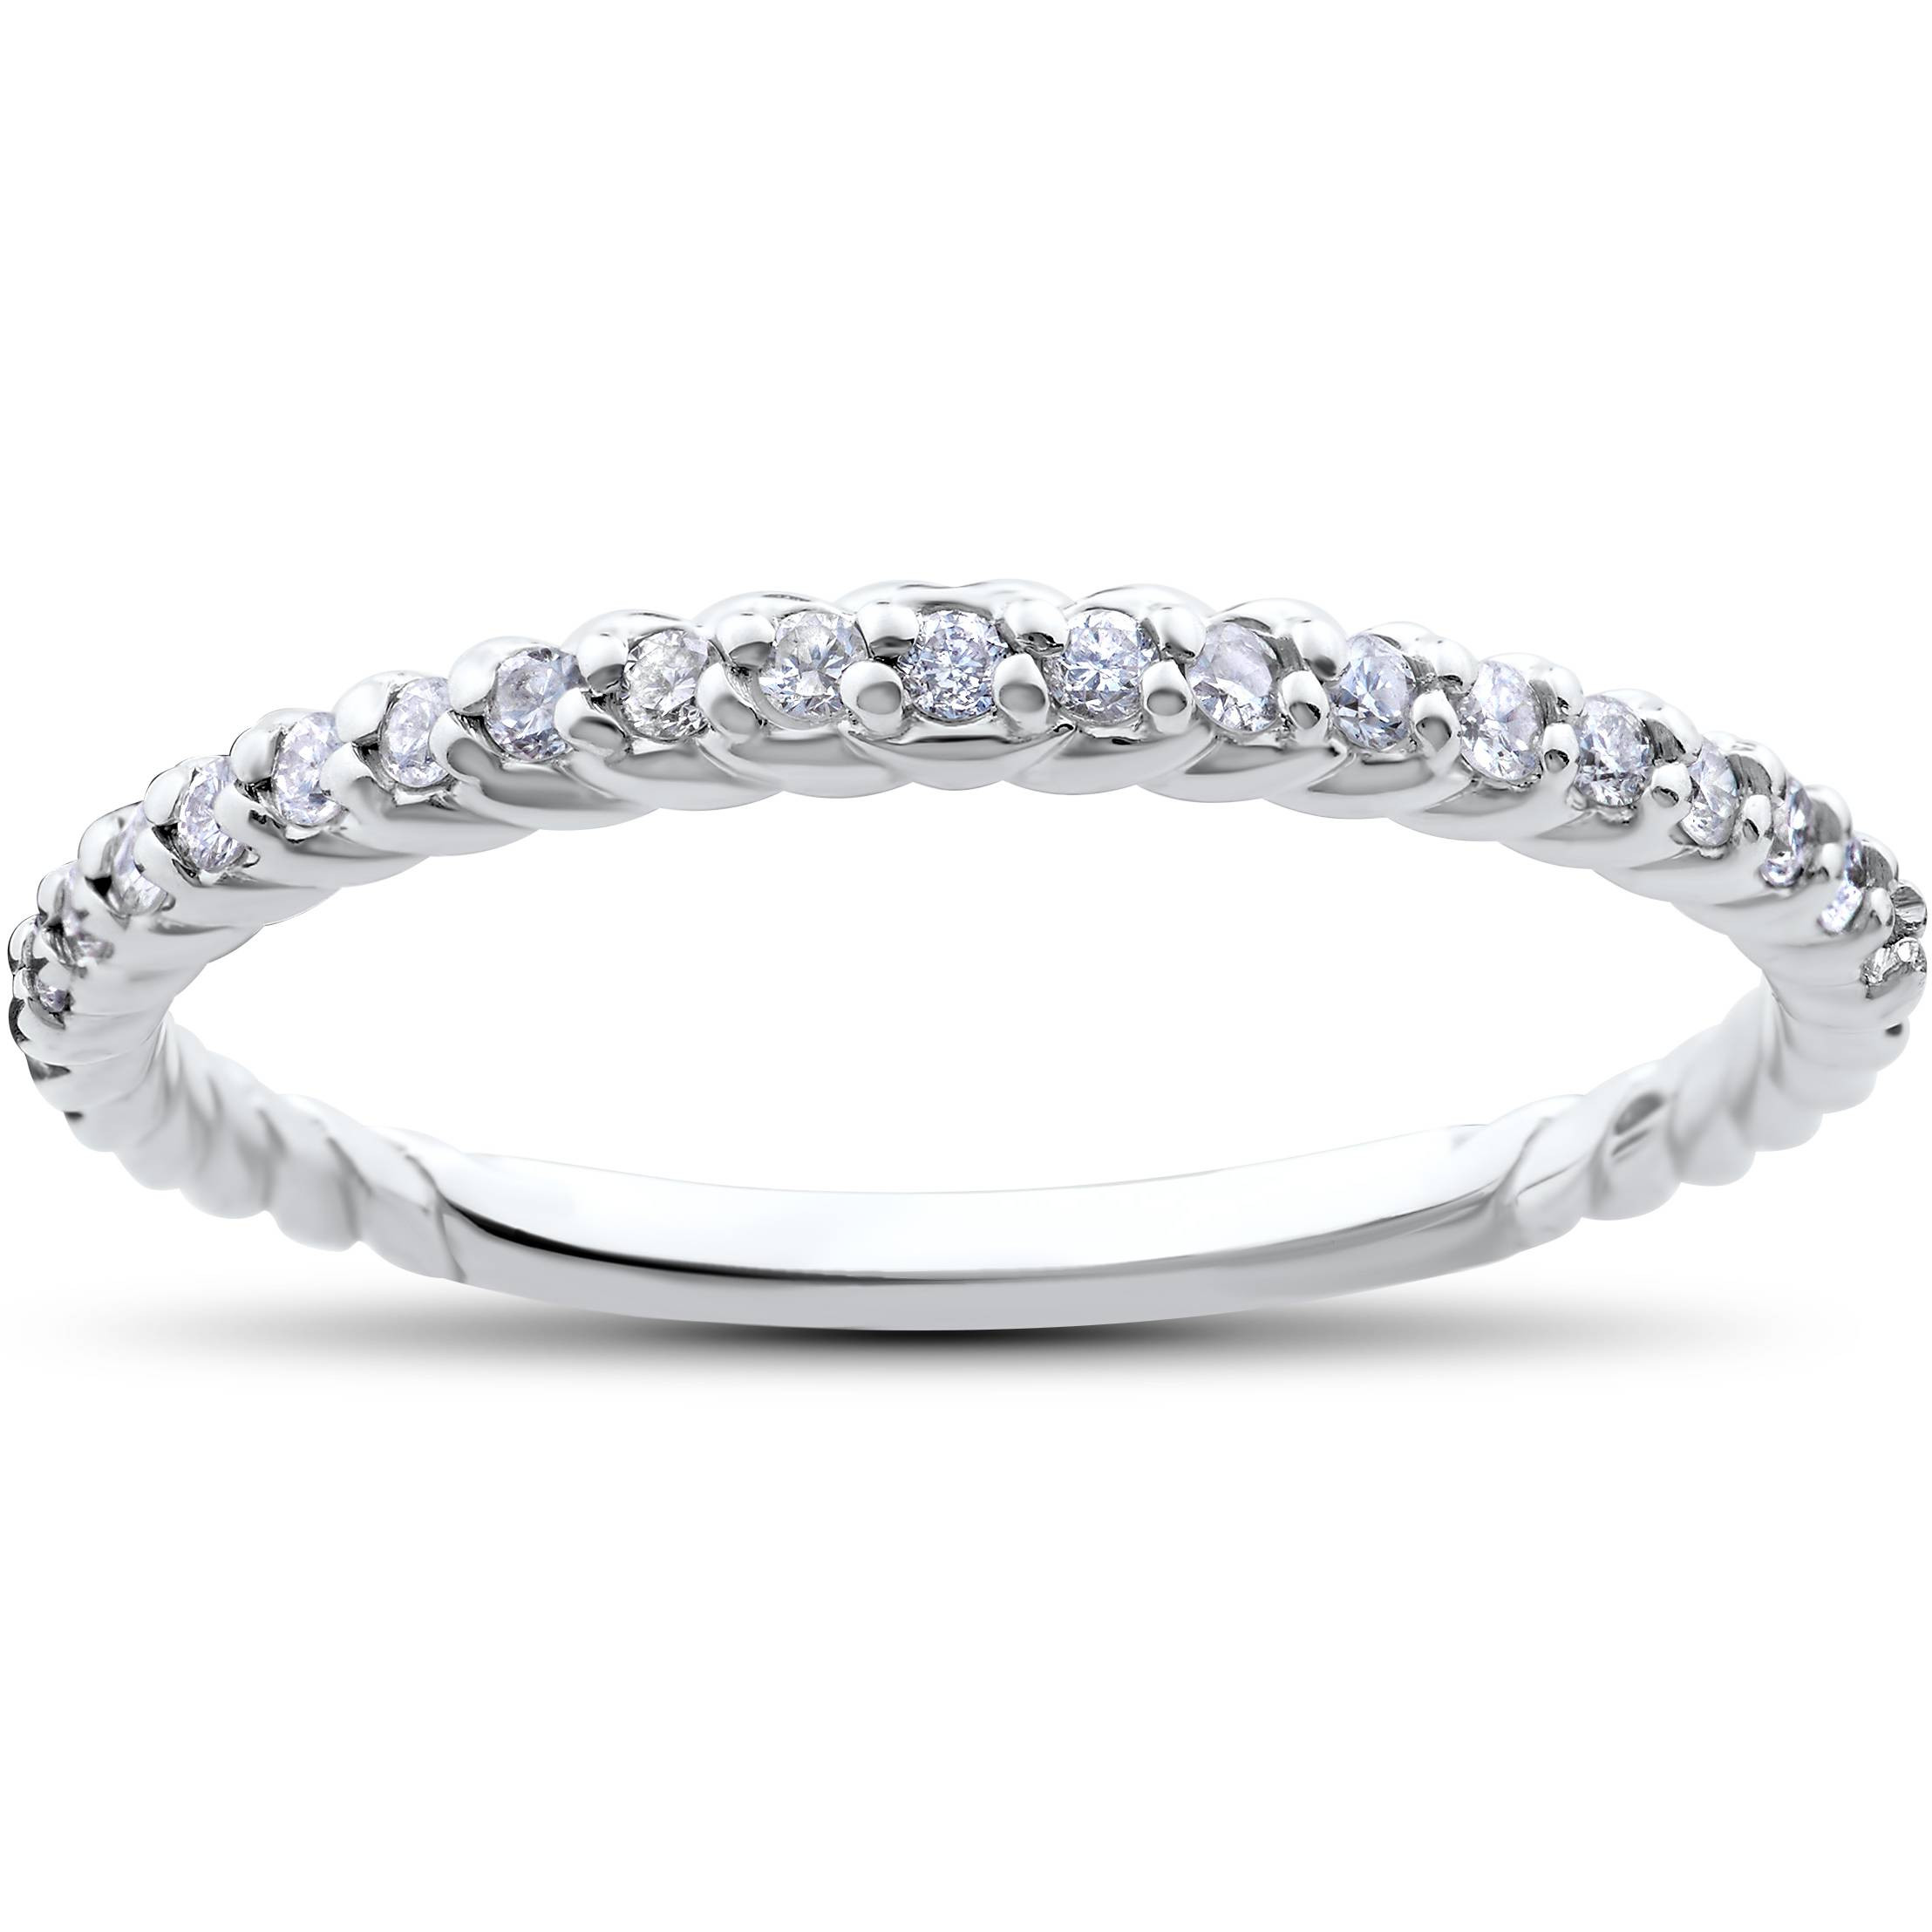 Stackable Diamond Rings
 Stackable Diamond Wedding Ring 1 4ct Braided Anniversary